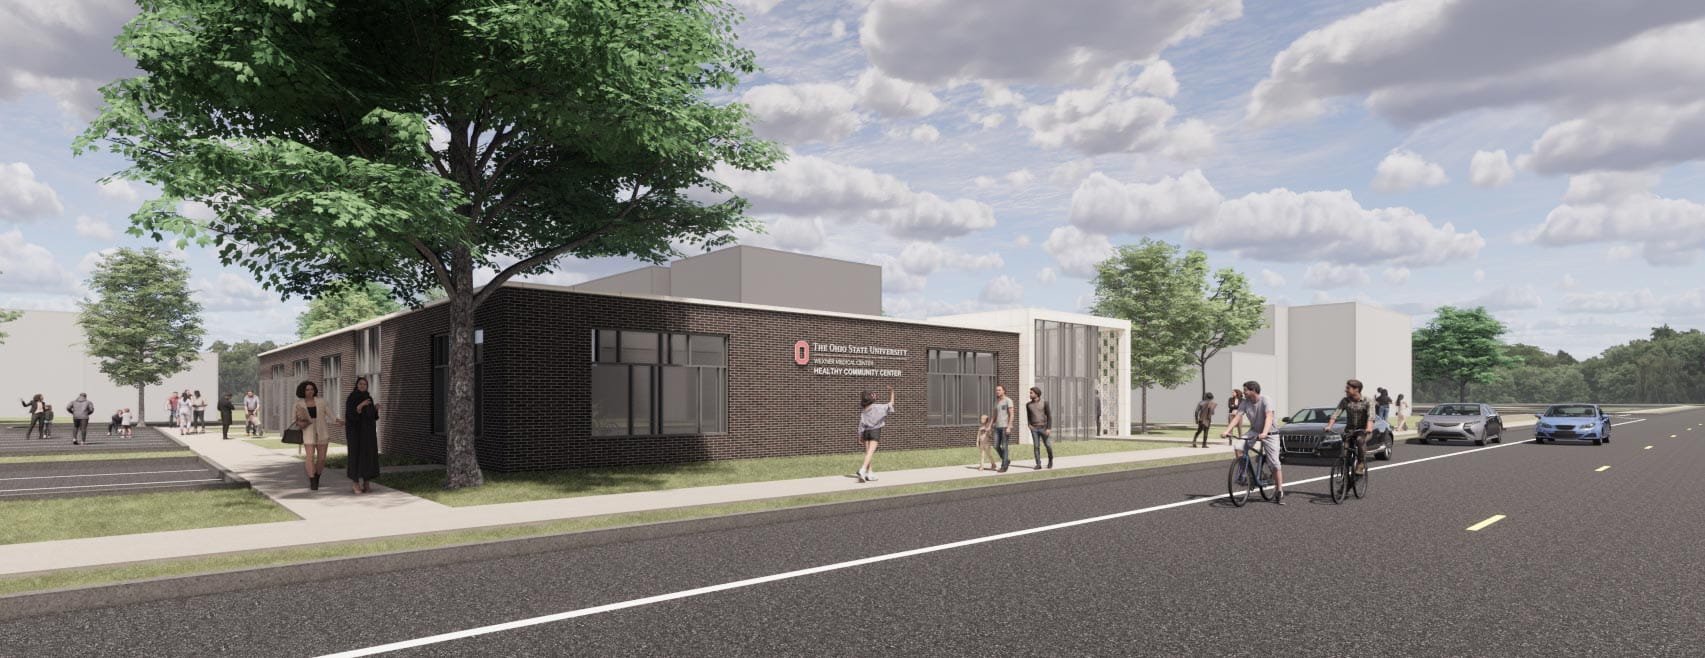 Rendering of the Healthy Community Center